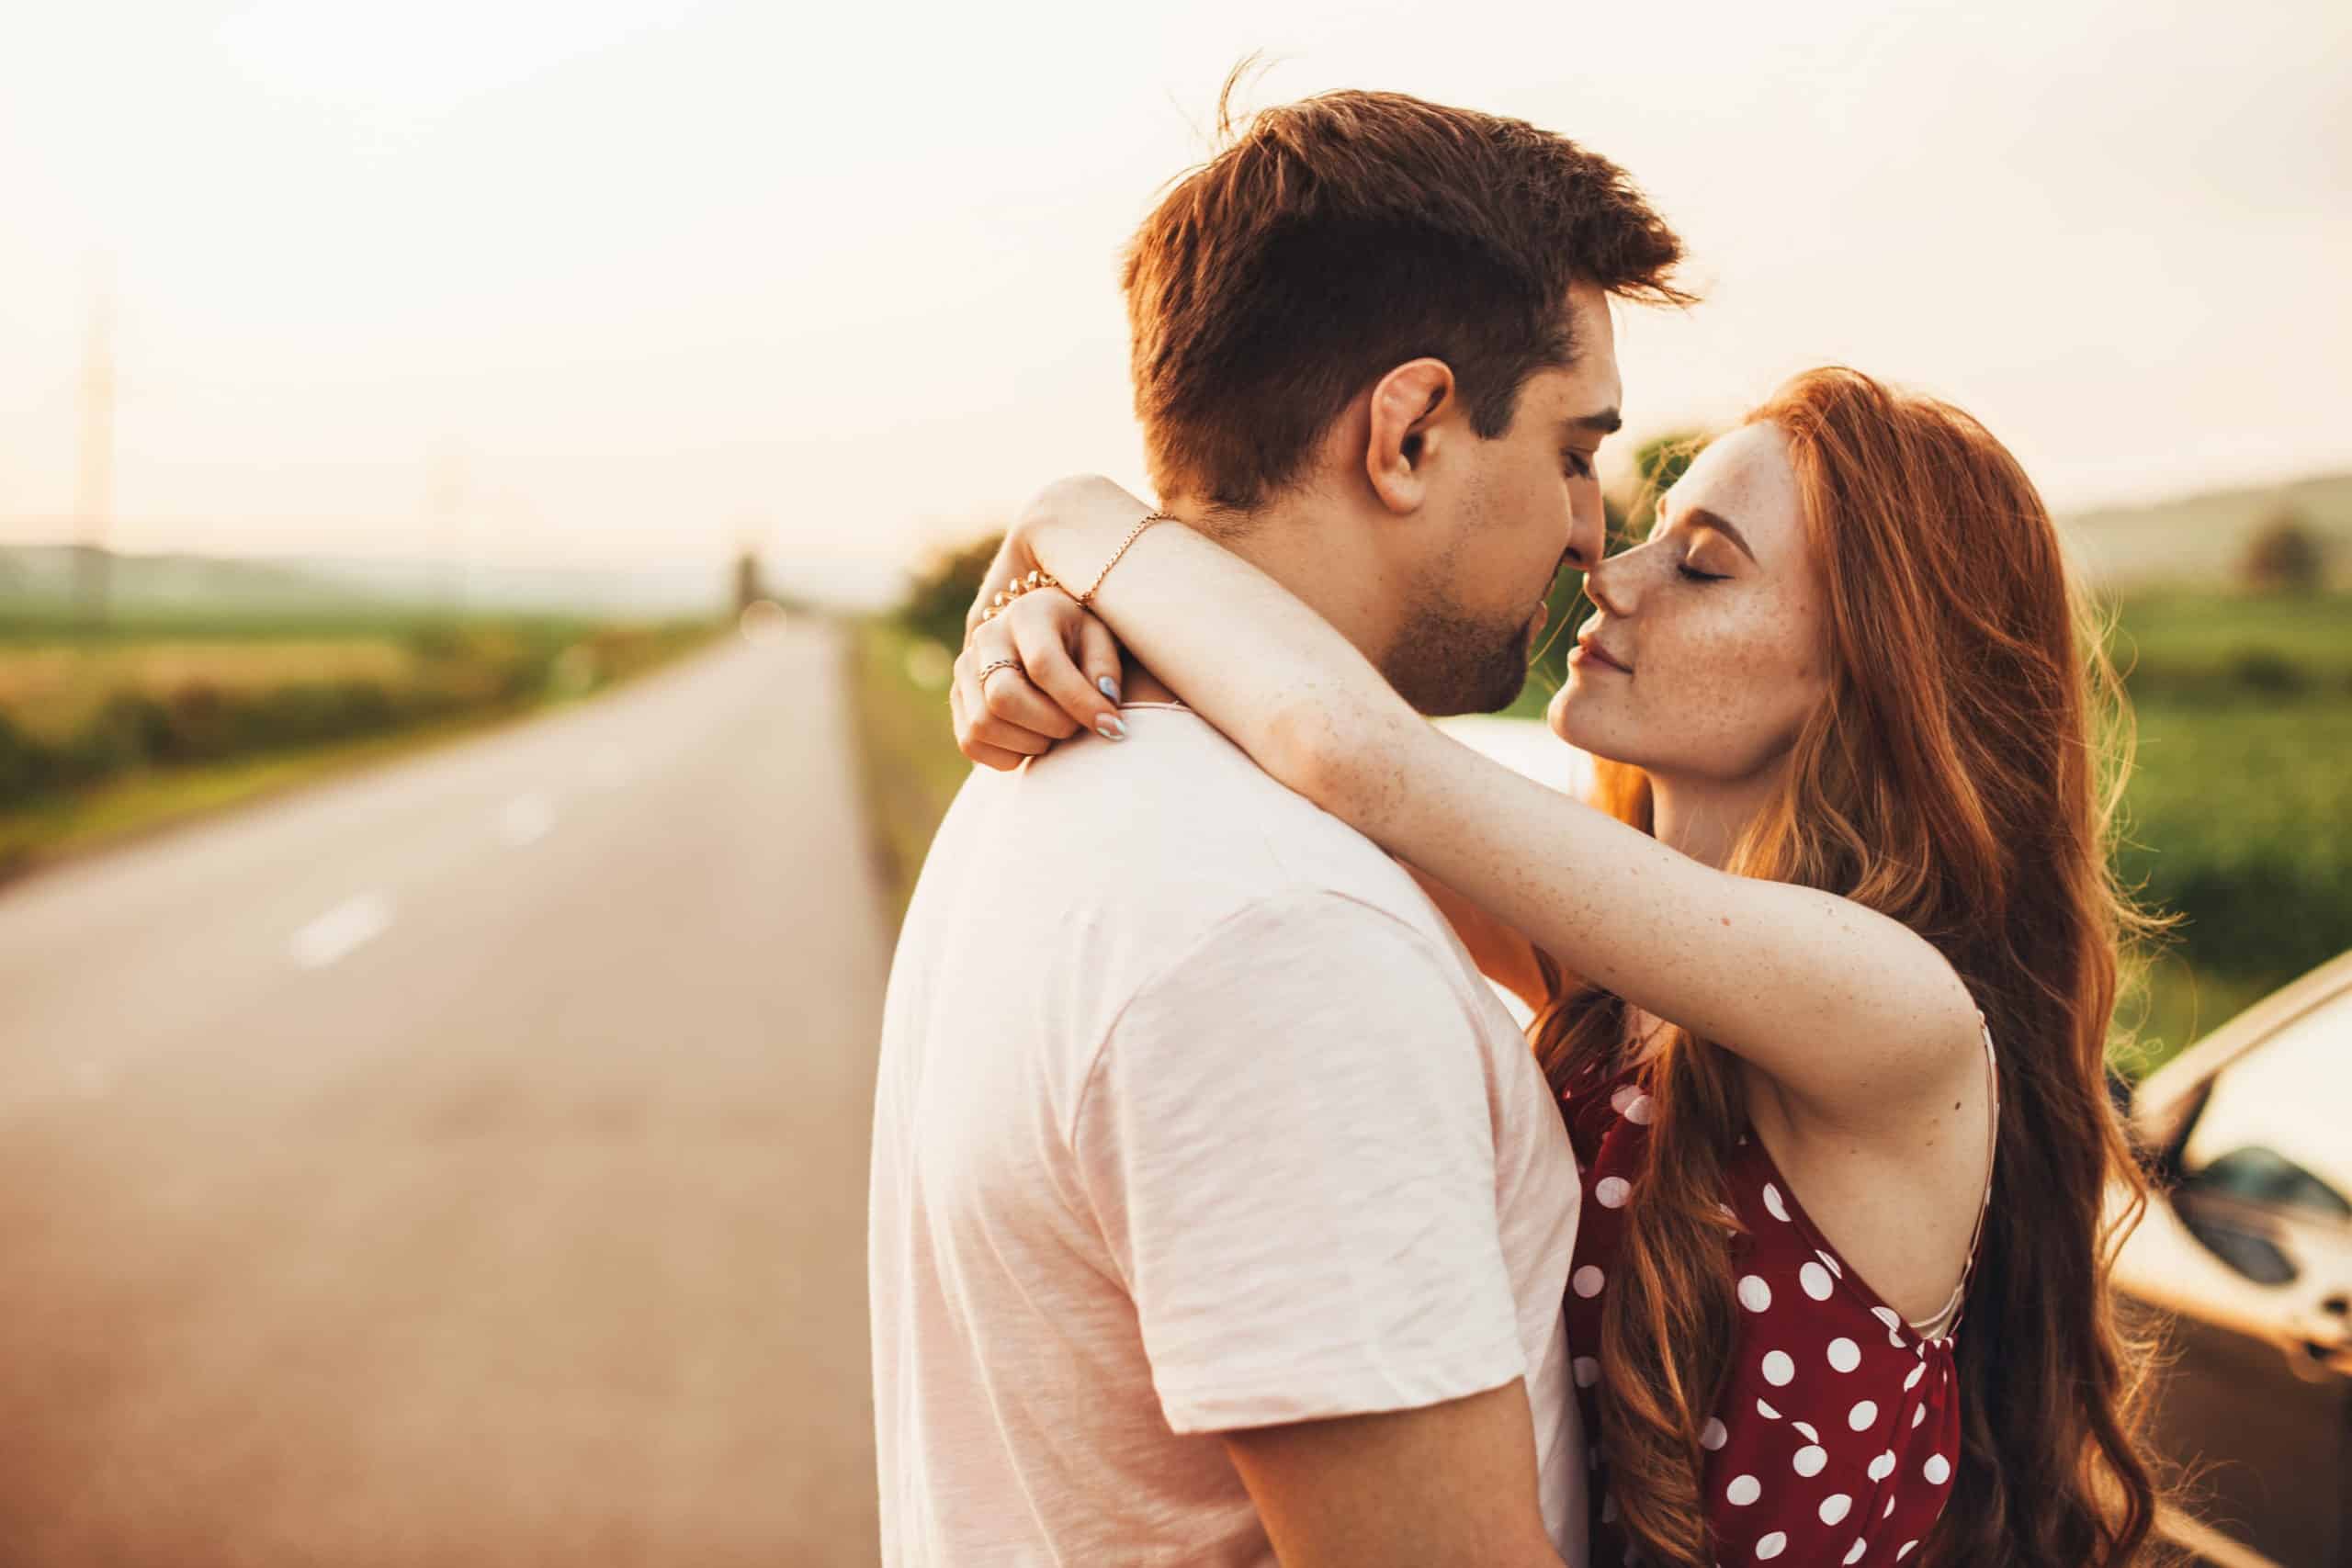 A red-haired girl in love embracing her boyfriend enjoying the moment with her eyes closed while standing on the side of the road.